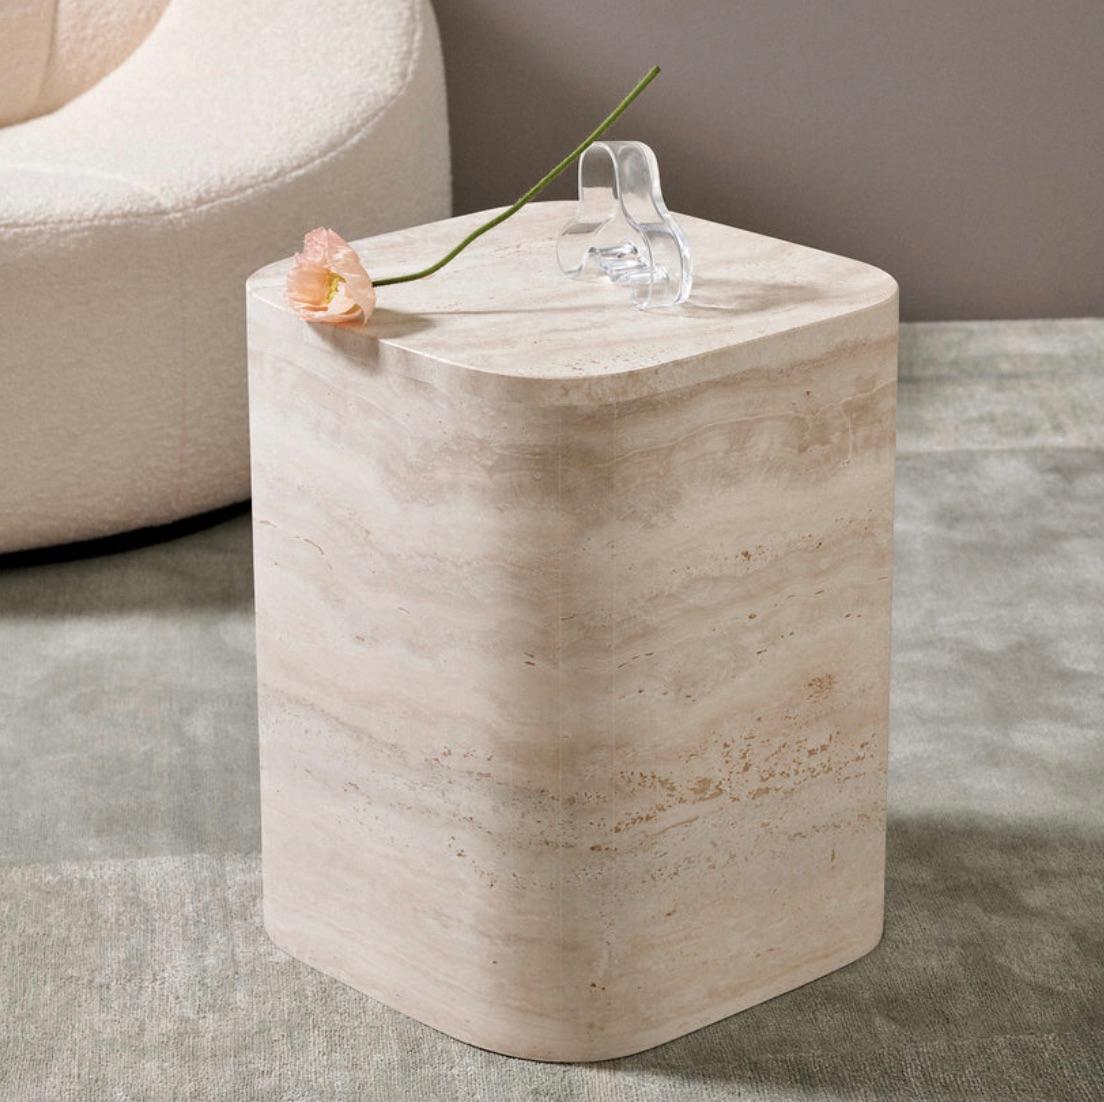 Sofia Side Table designed by Just Adele.

An occasional table, designed with soft curved edges allowing the natural veins in travertine to shine. Each piece is hollow with seamless edges. Can be paired with The Sofia Coffee Table.

Each piece is